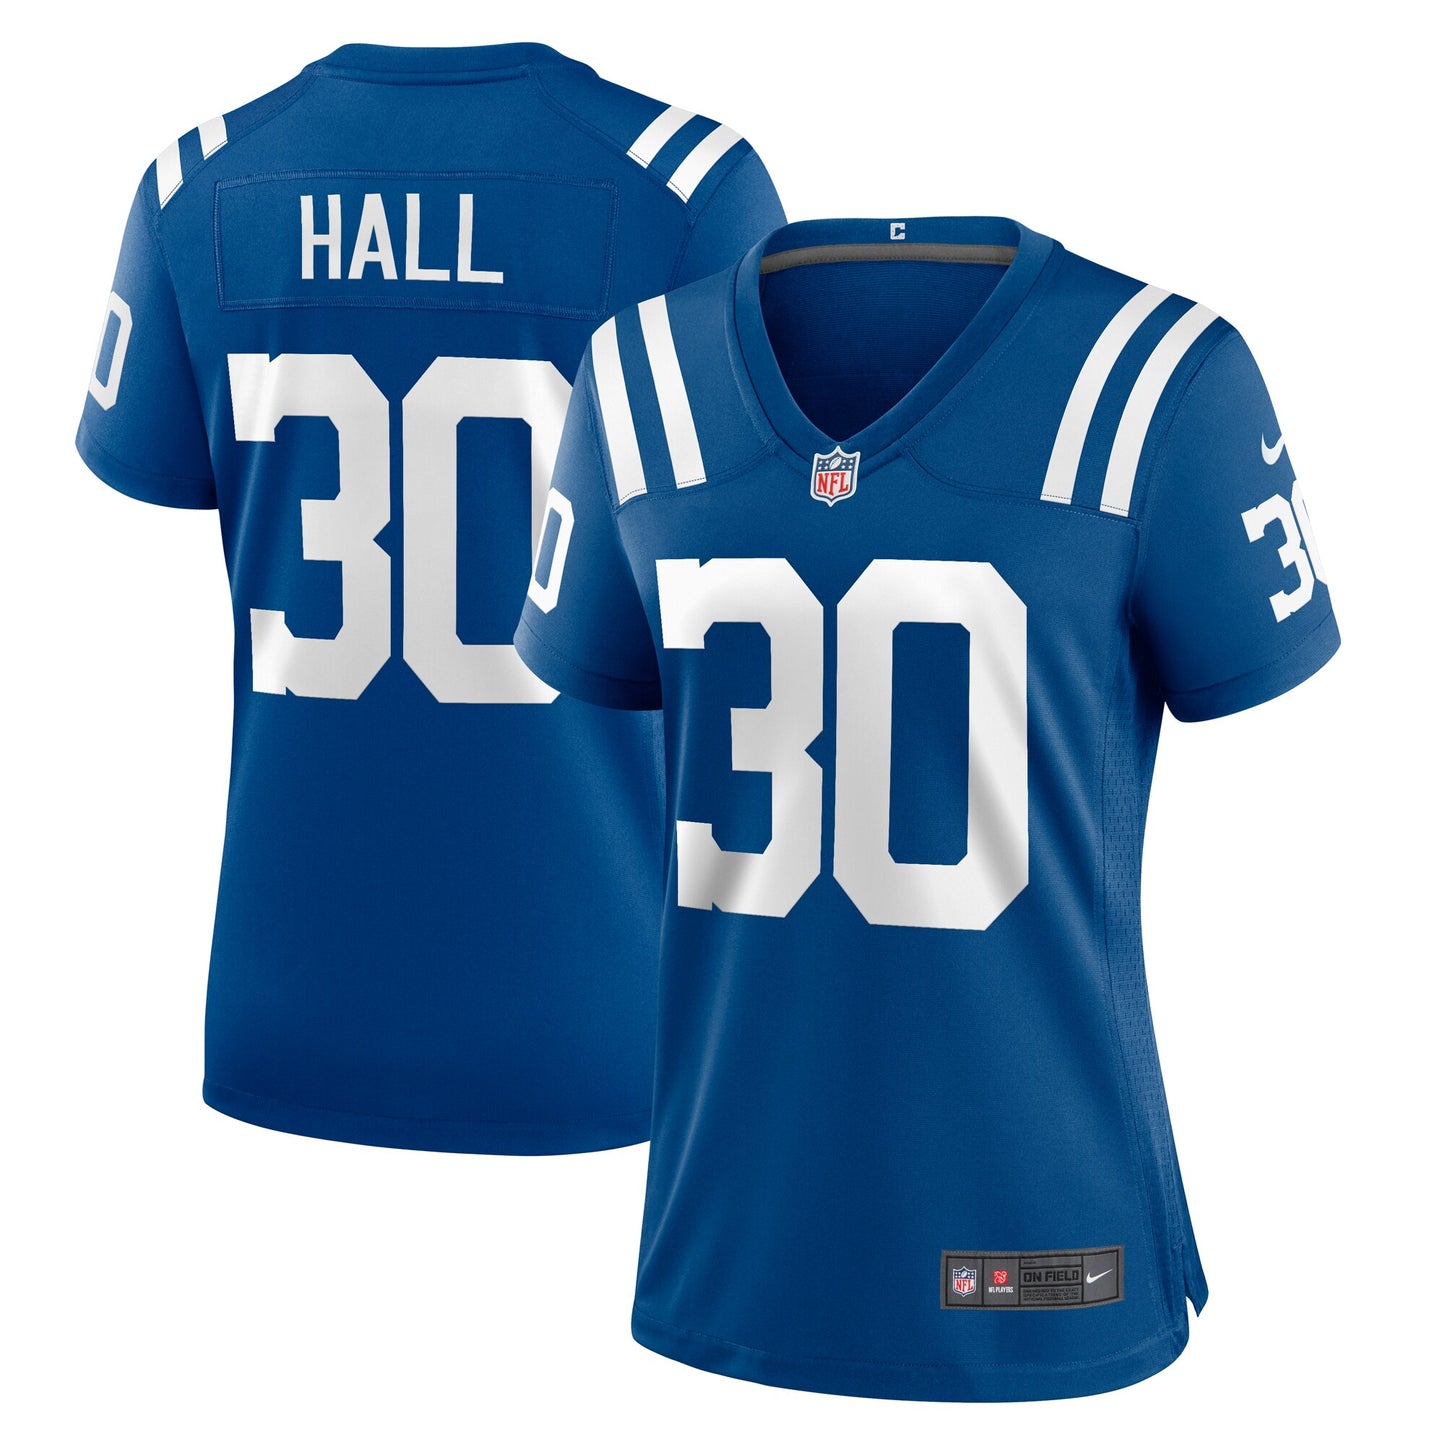 Darren Hall Indianapolis Colts Nike Women's Team Game Jersey - Royal